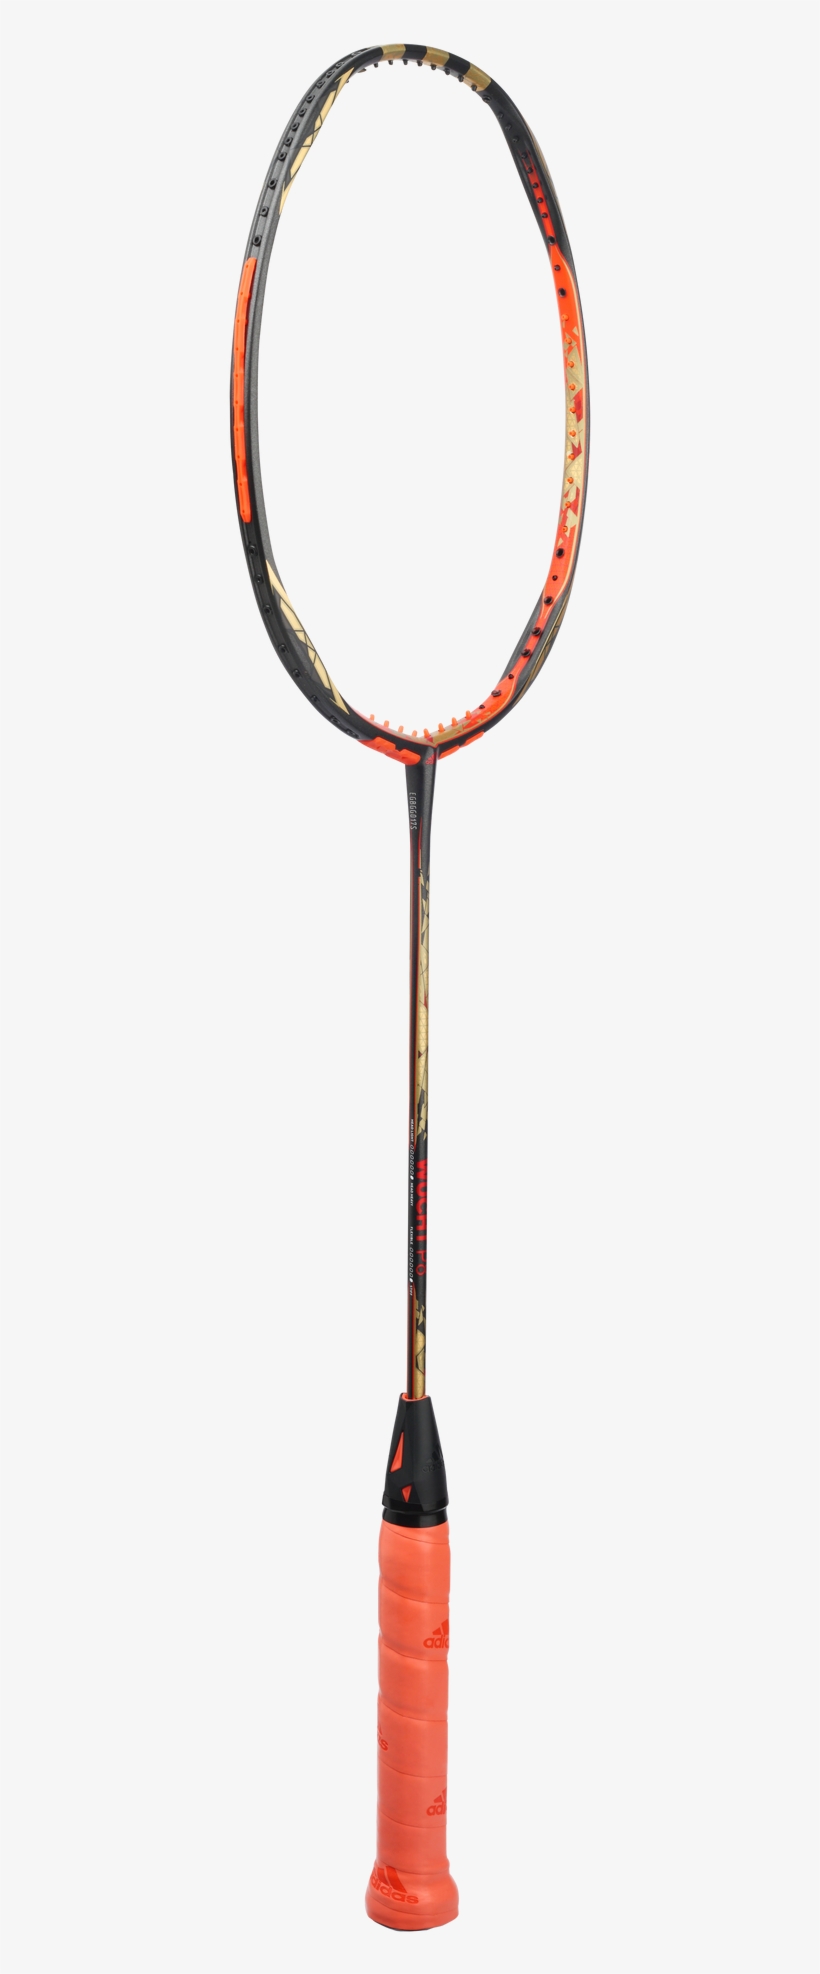 The Wucht P8 Is Adidas' Toughest, Most Powerful And - Badminton, transparent png #10080062